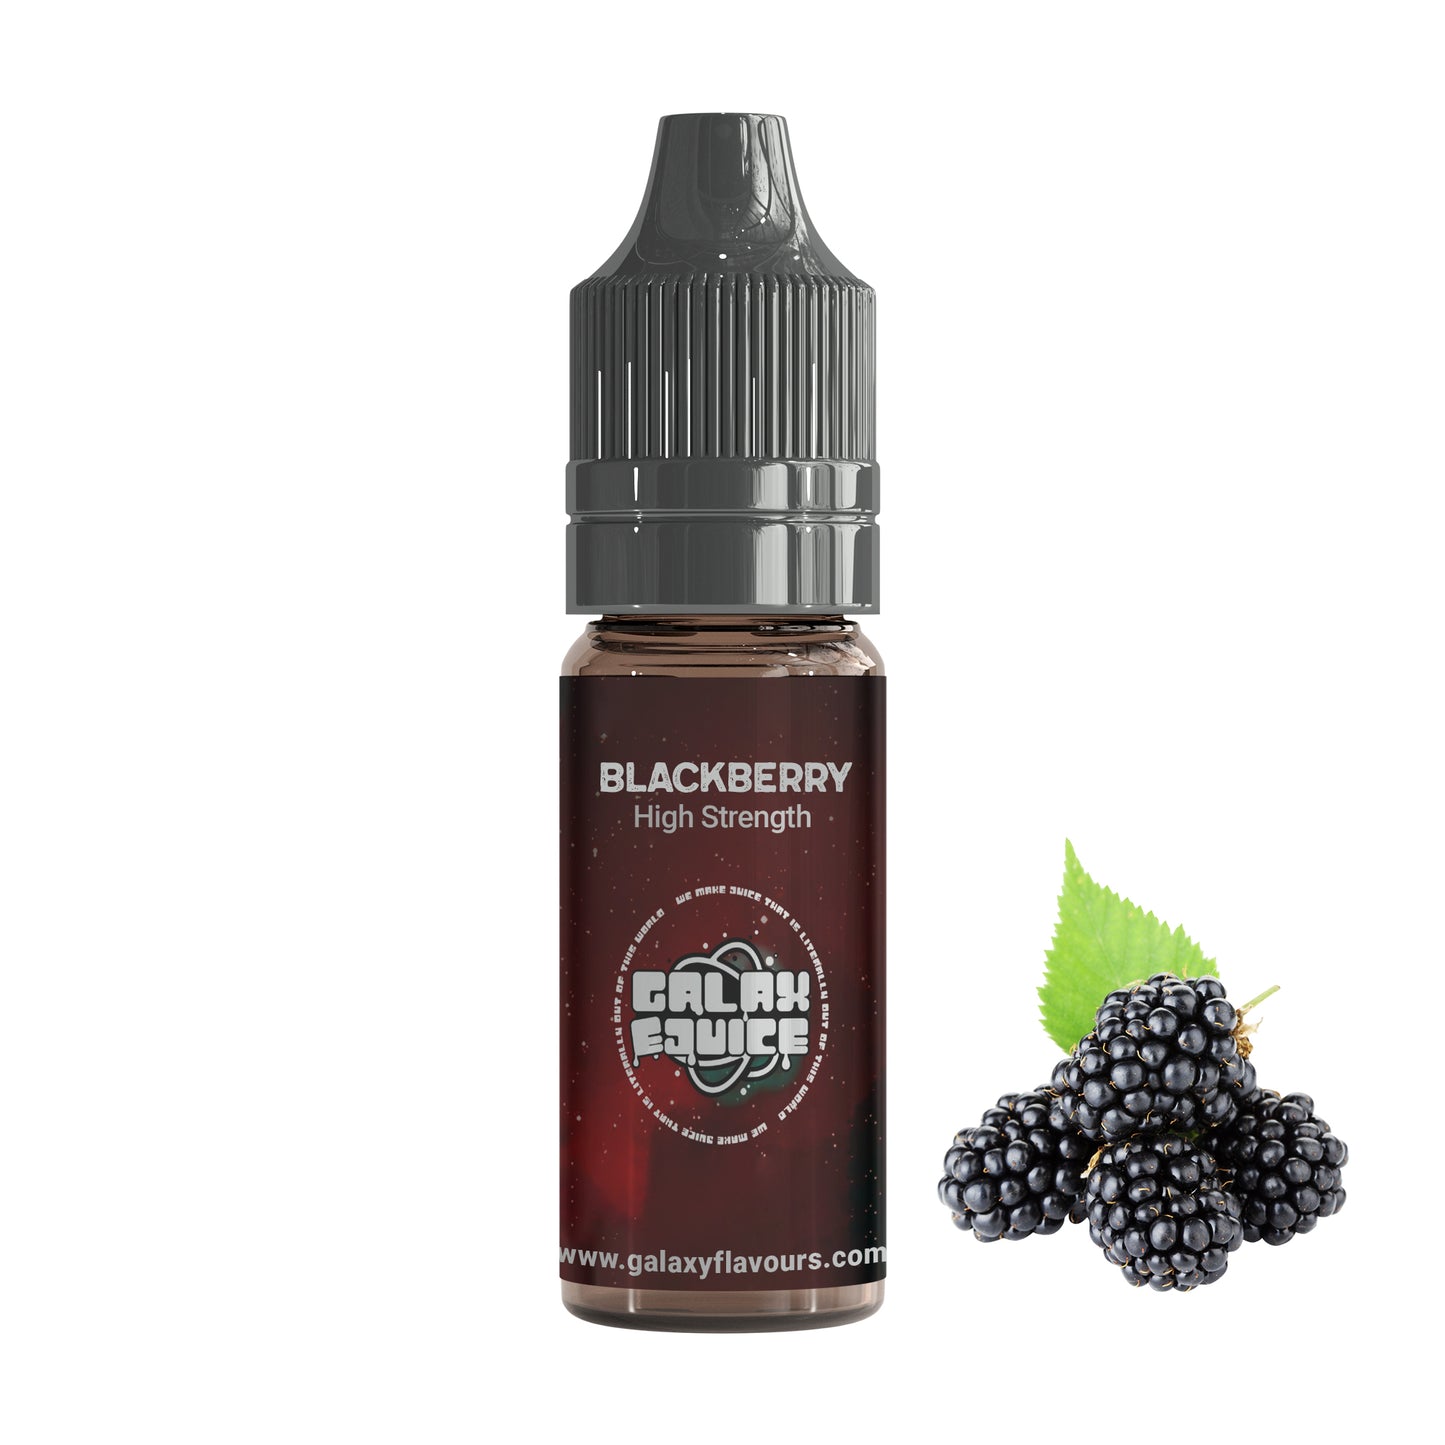 Blackberry High Strength Professional Flavouring.